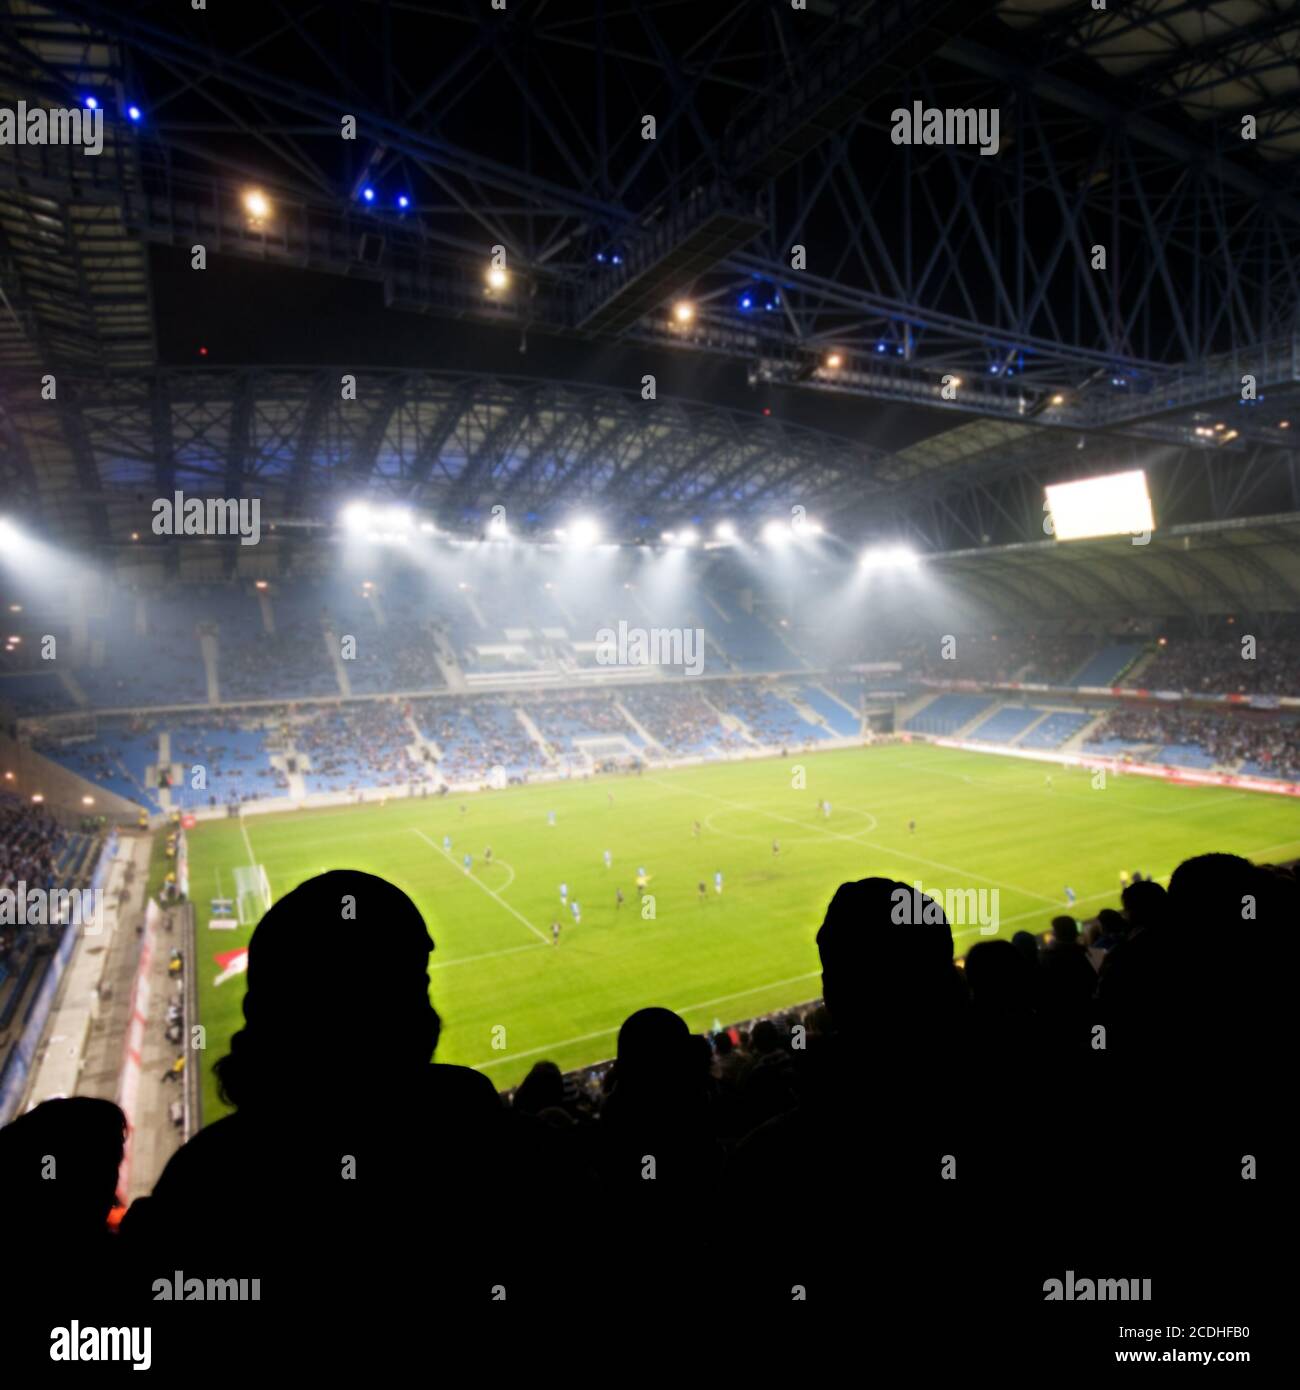 Silhouettes of fans celebrating a goal on football / soccer match Stock Photo